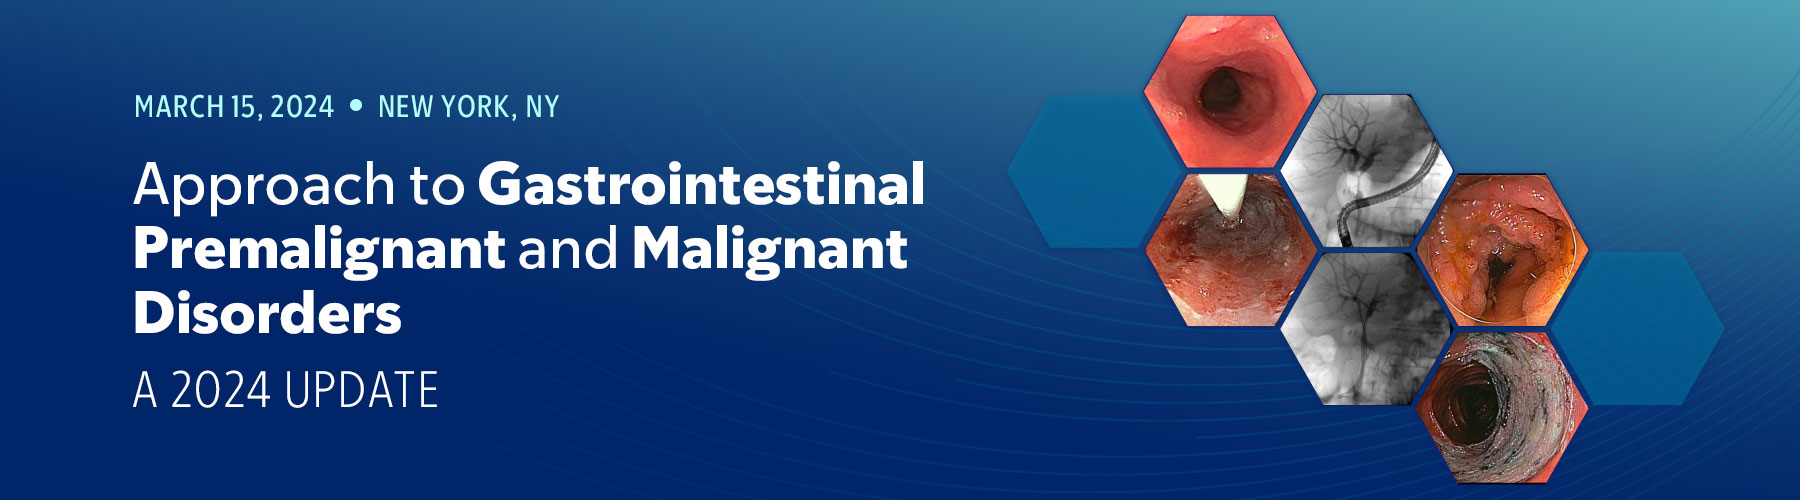 Approach to Gastrointestinal Premalignant and Malignant Disorders: A 2024 Update Banner